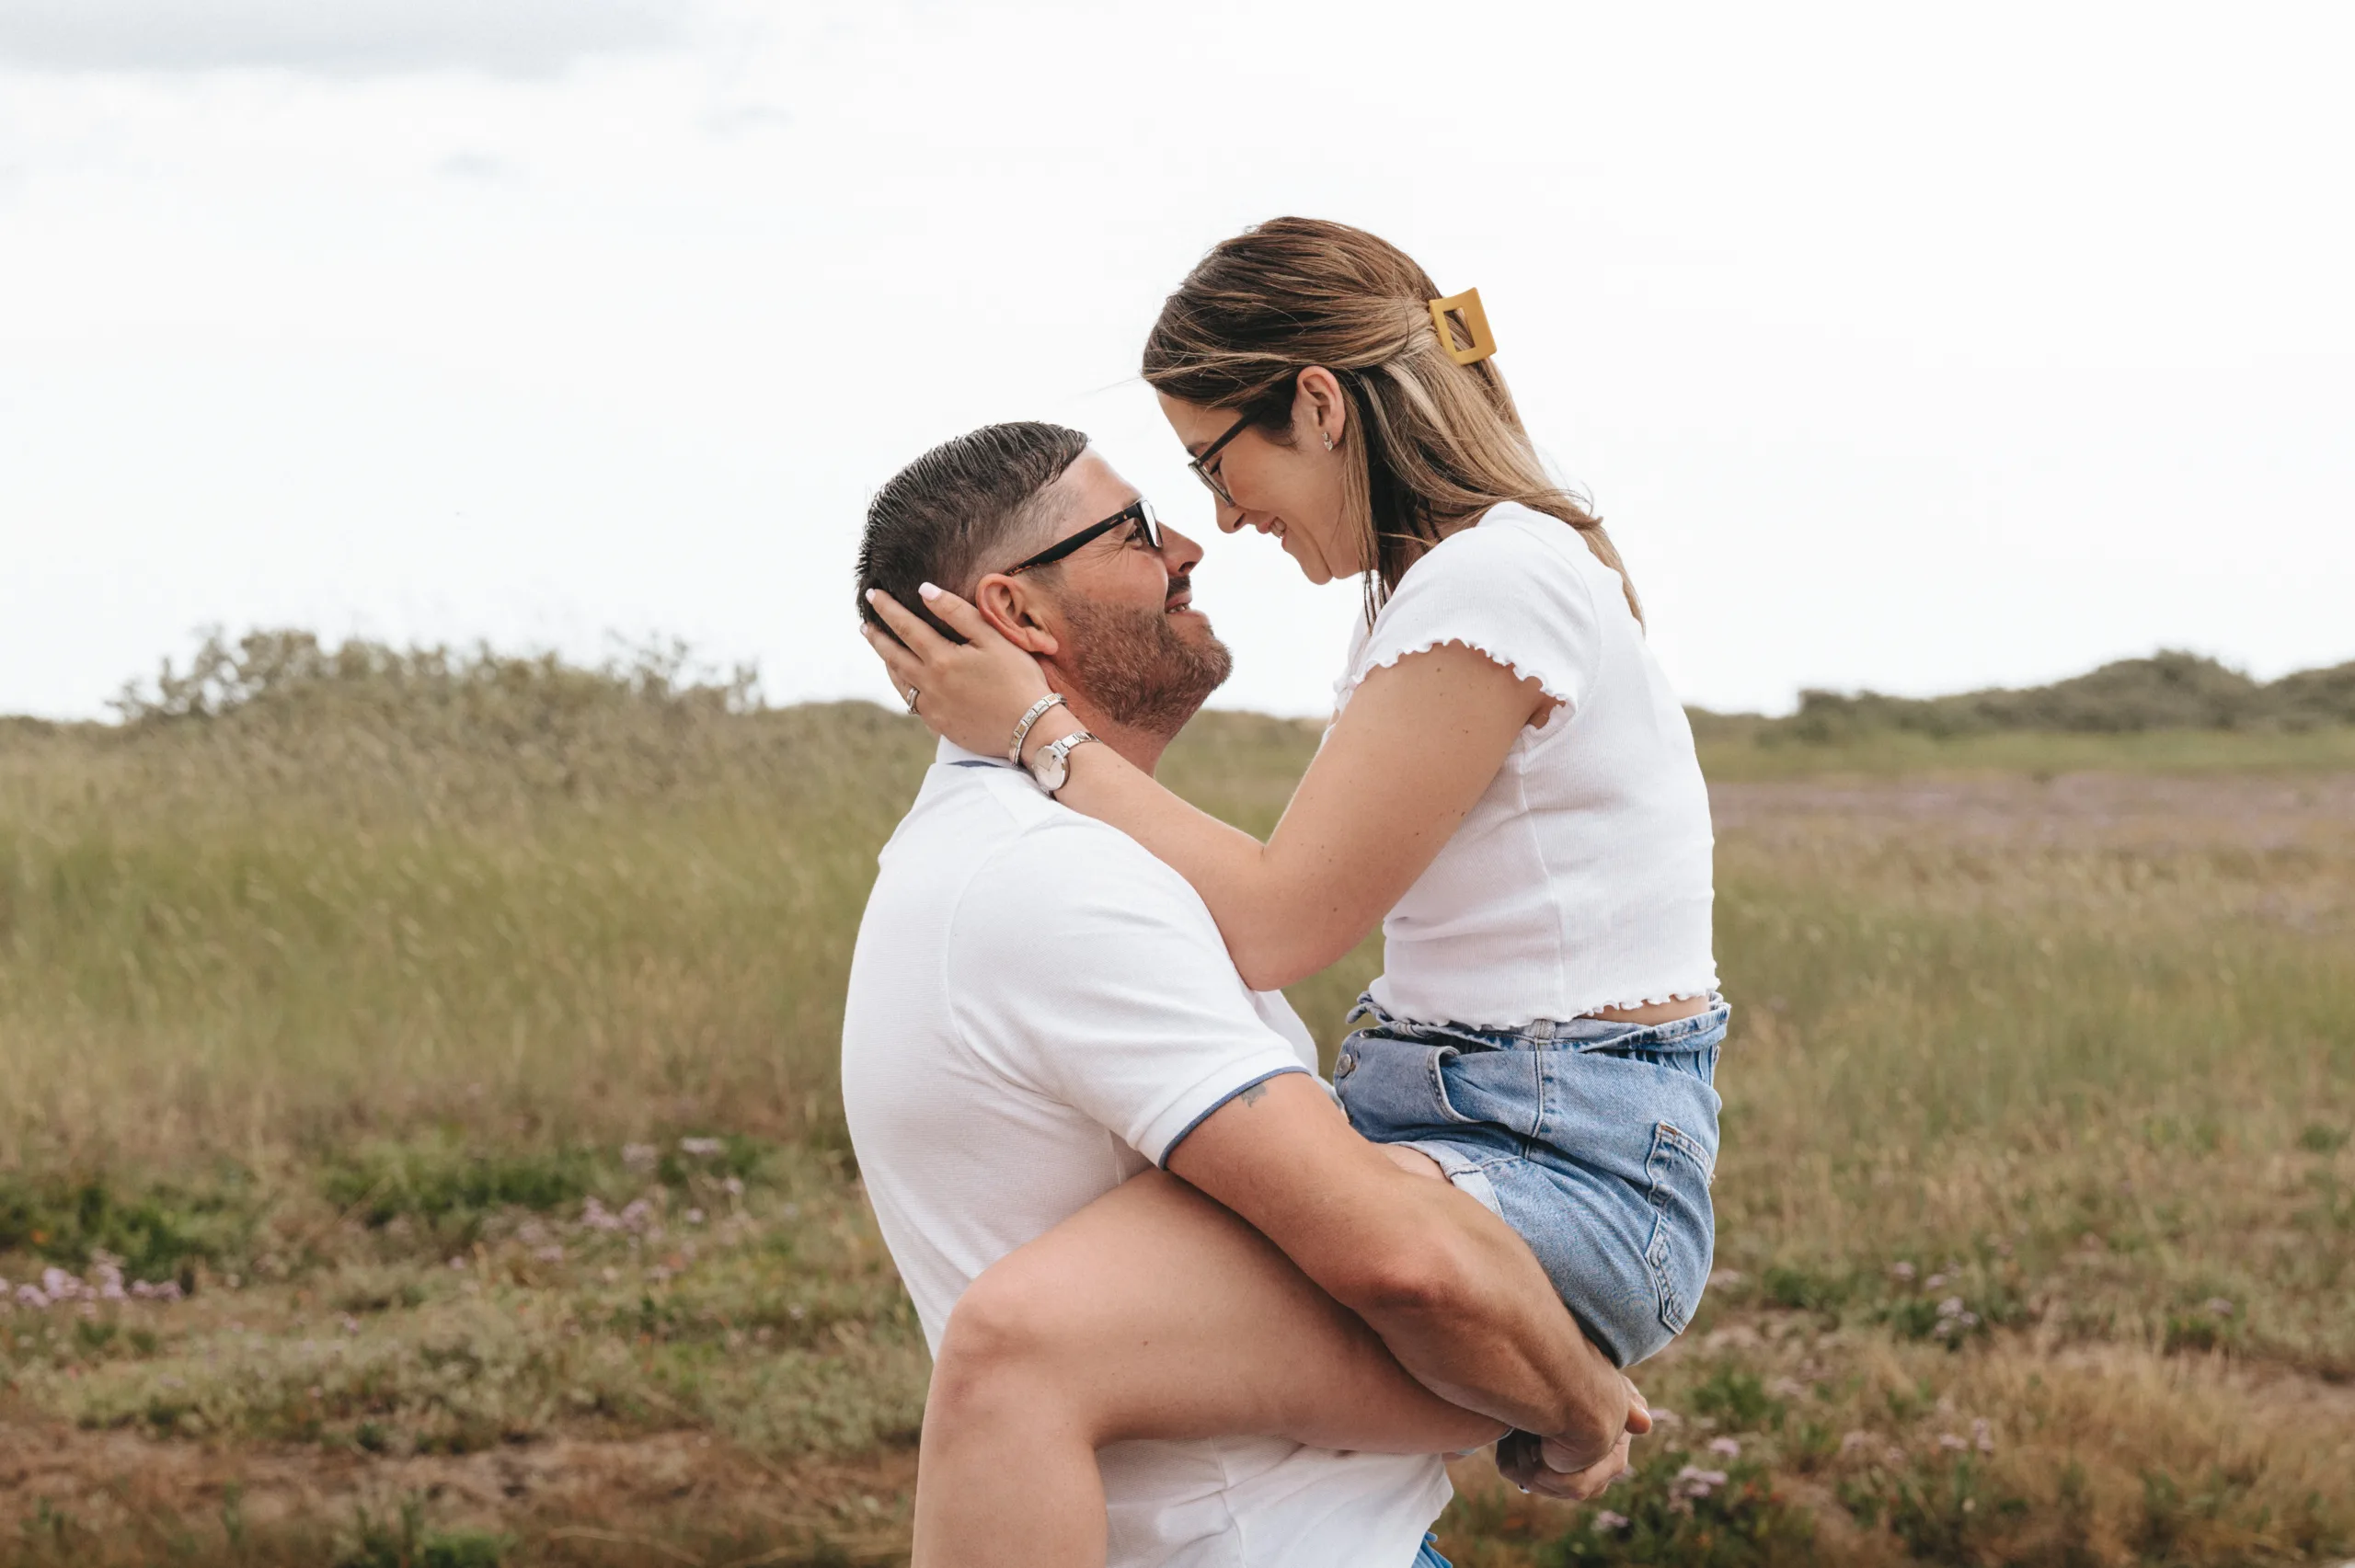 A man and woman embracing in a field, captured by a photographer.